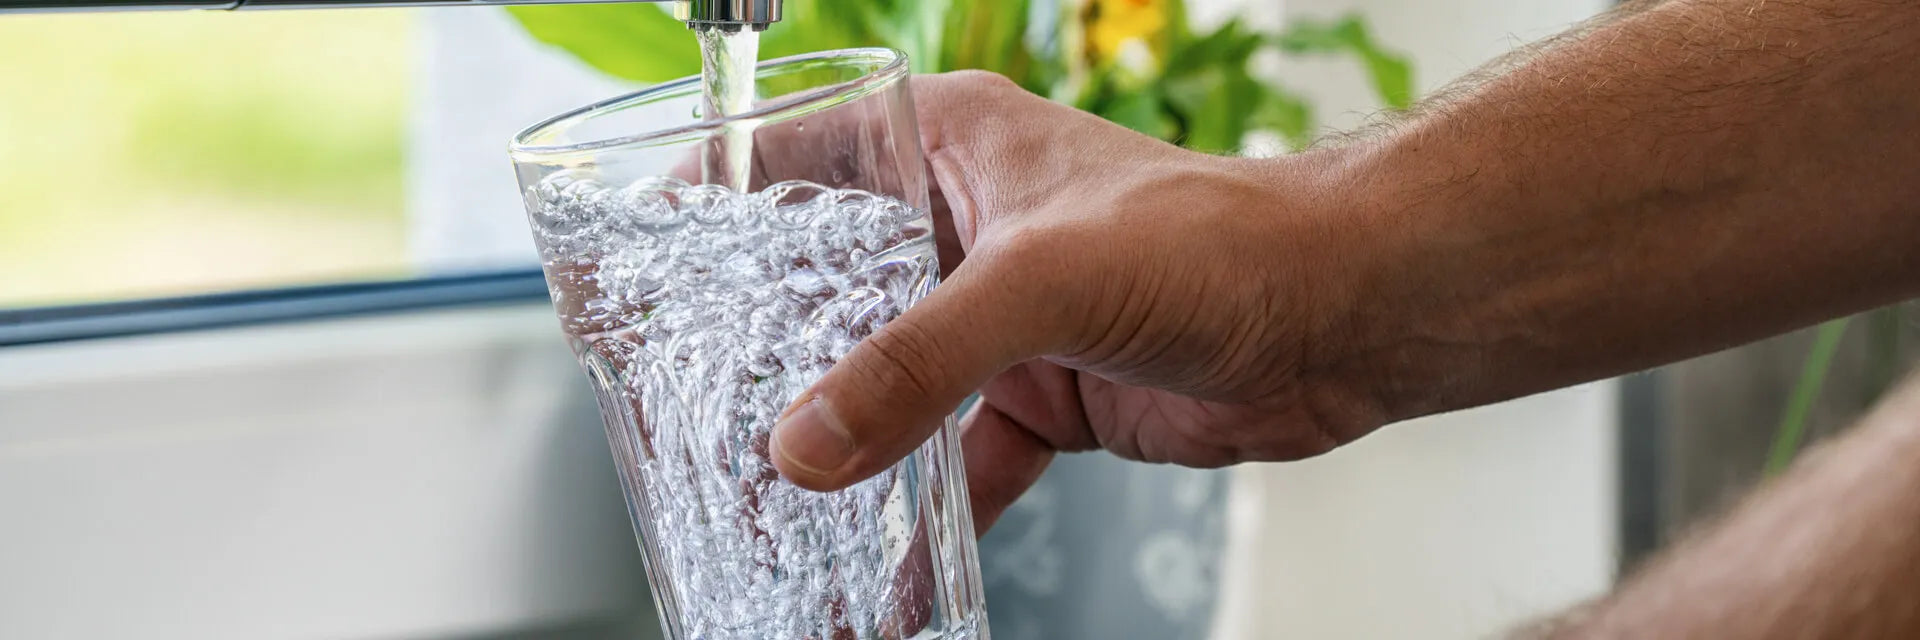 Why We All Need to Care for the Quality of Our Drinking Water